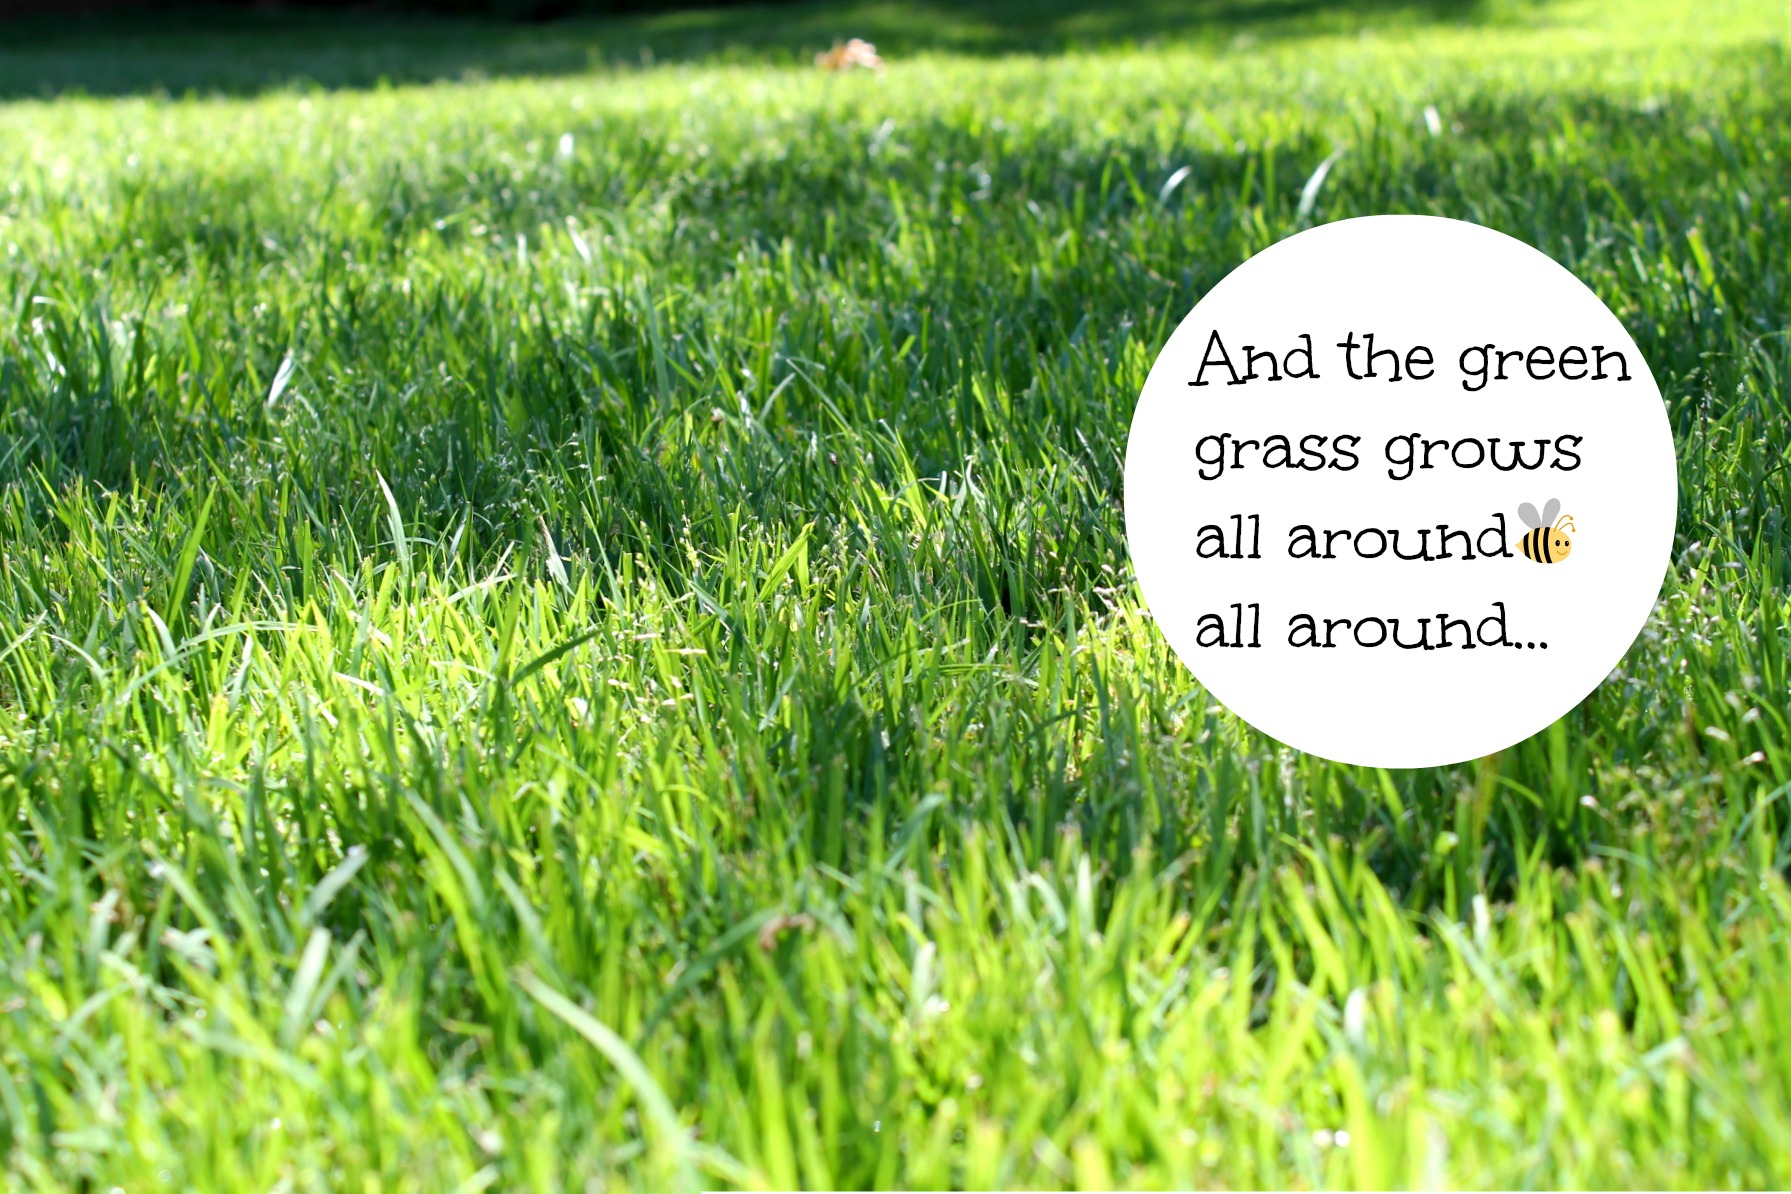 Green healthy lawn with zoysia plugs